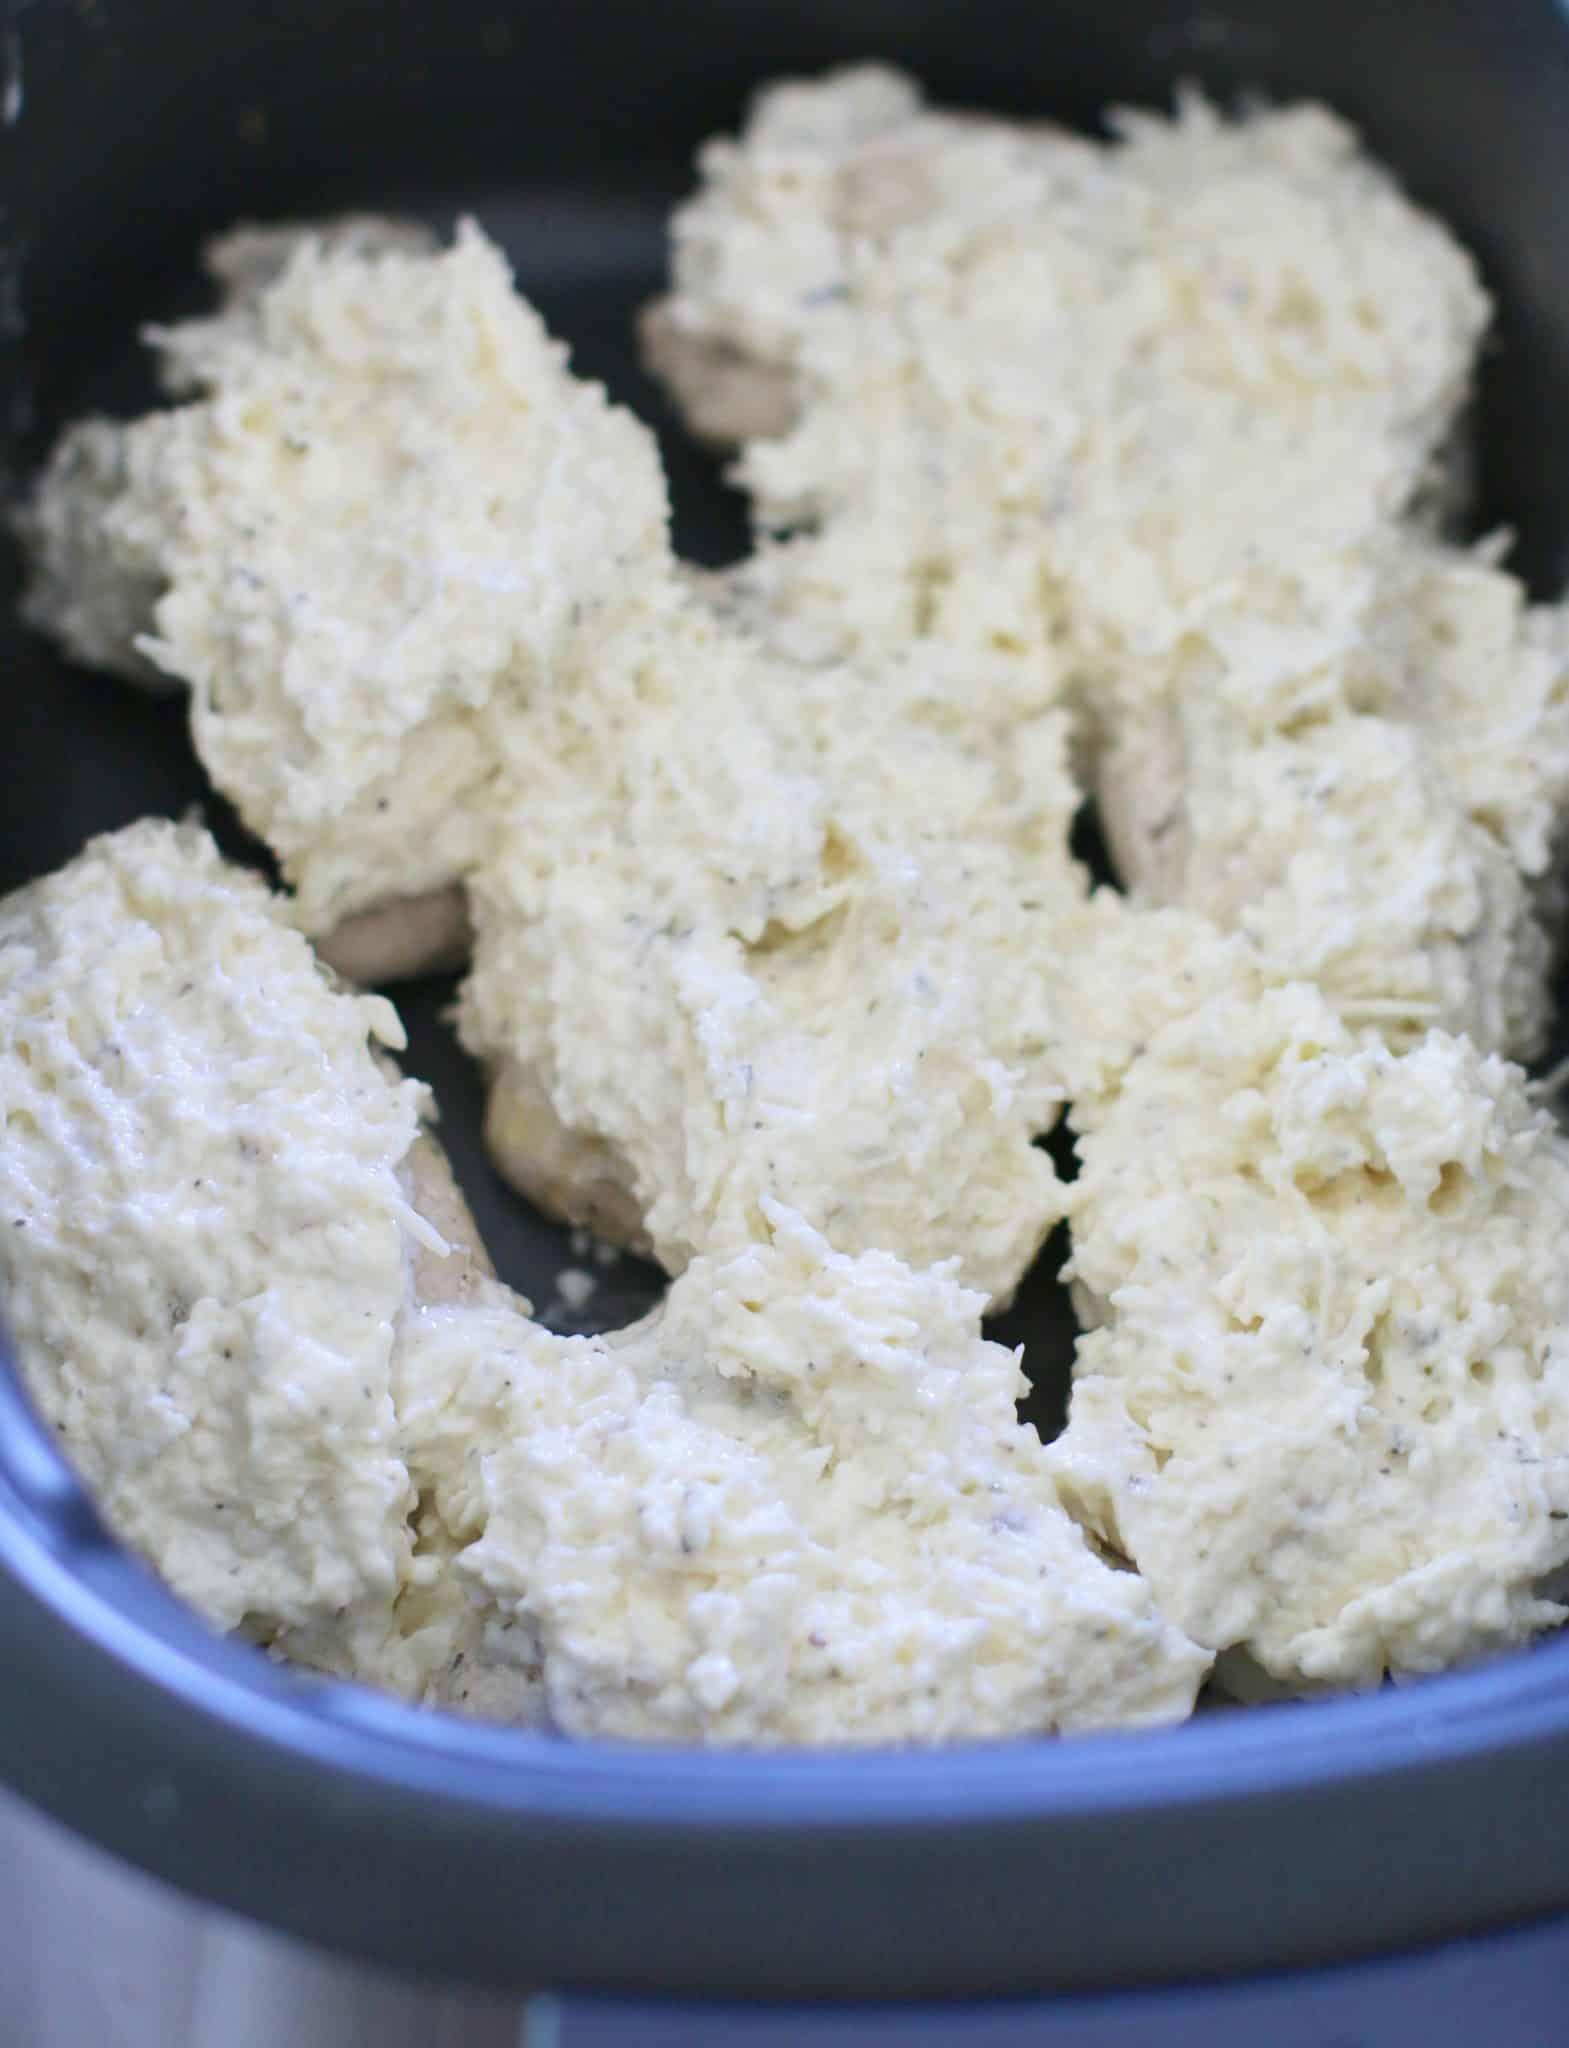 Garlic Parmesan coated chicken breasts in a slow cooker.